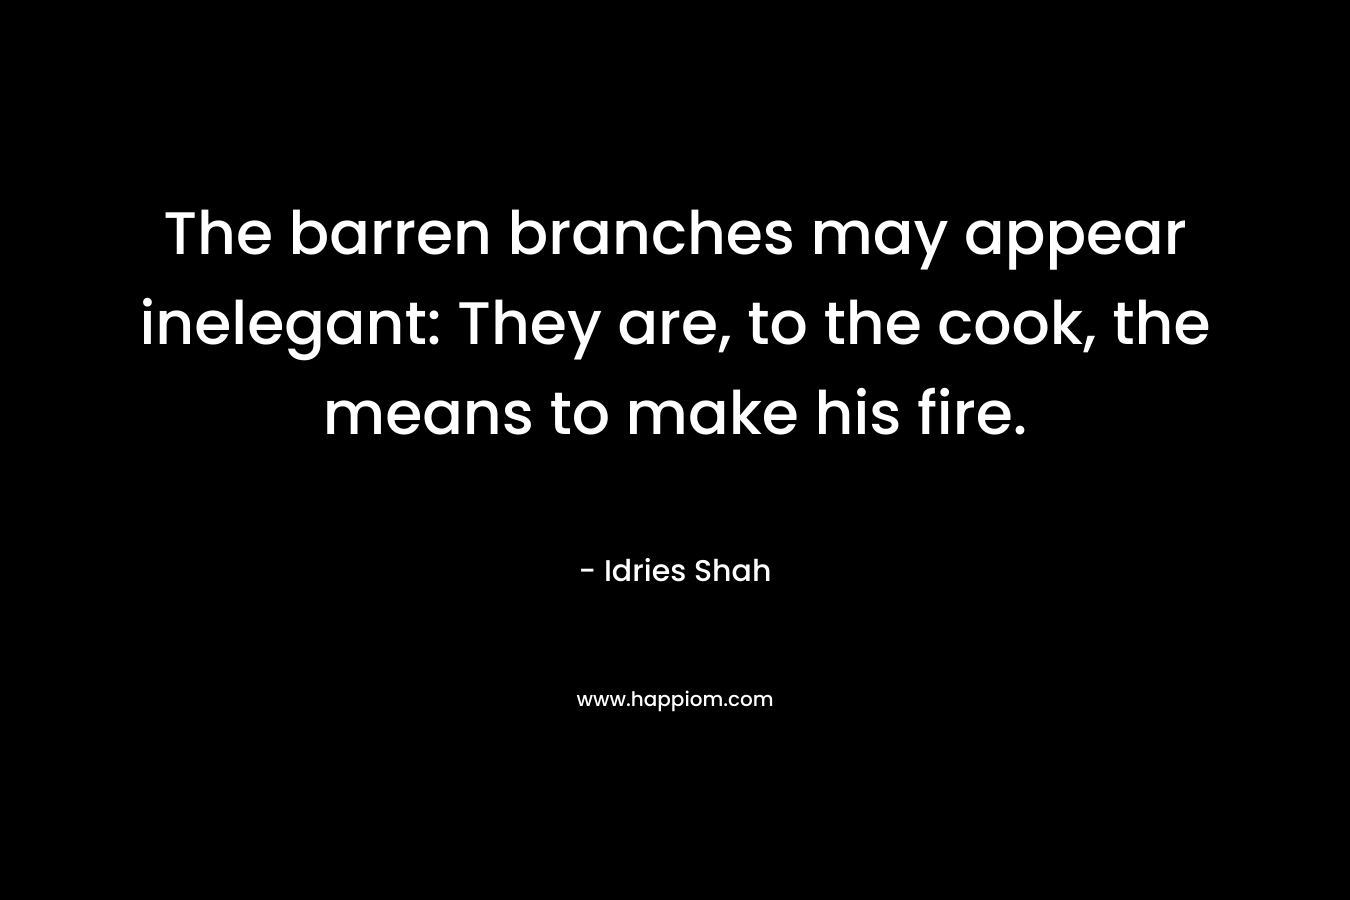 The barren branches may appear inelegant: They are, to the cook, the means to make his fire.